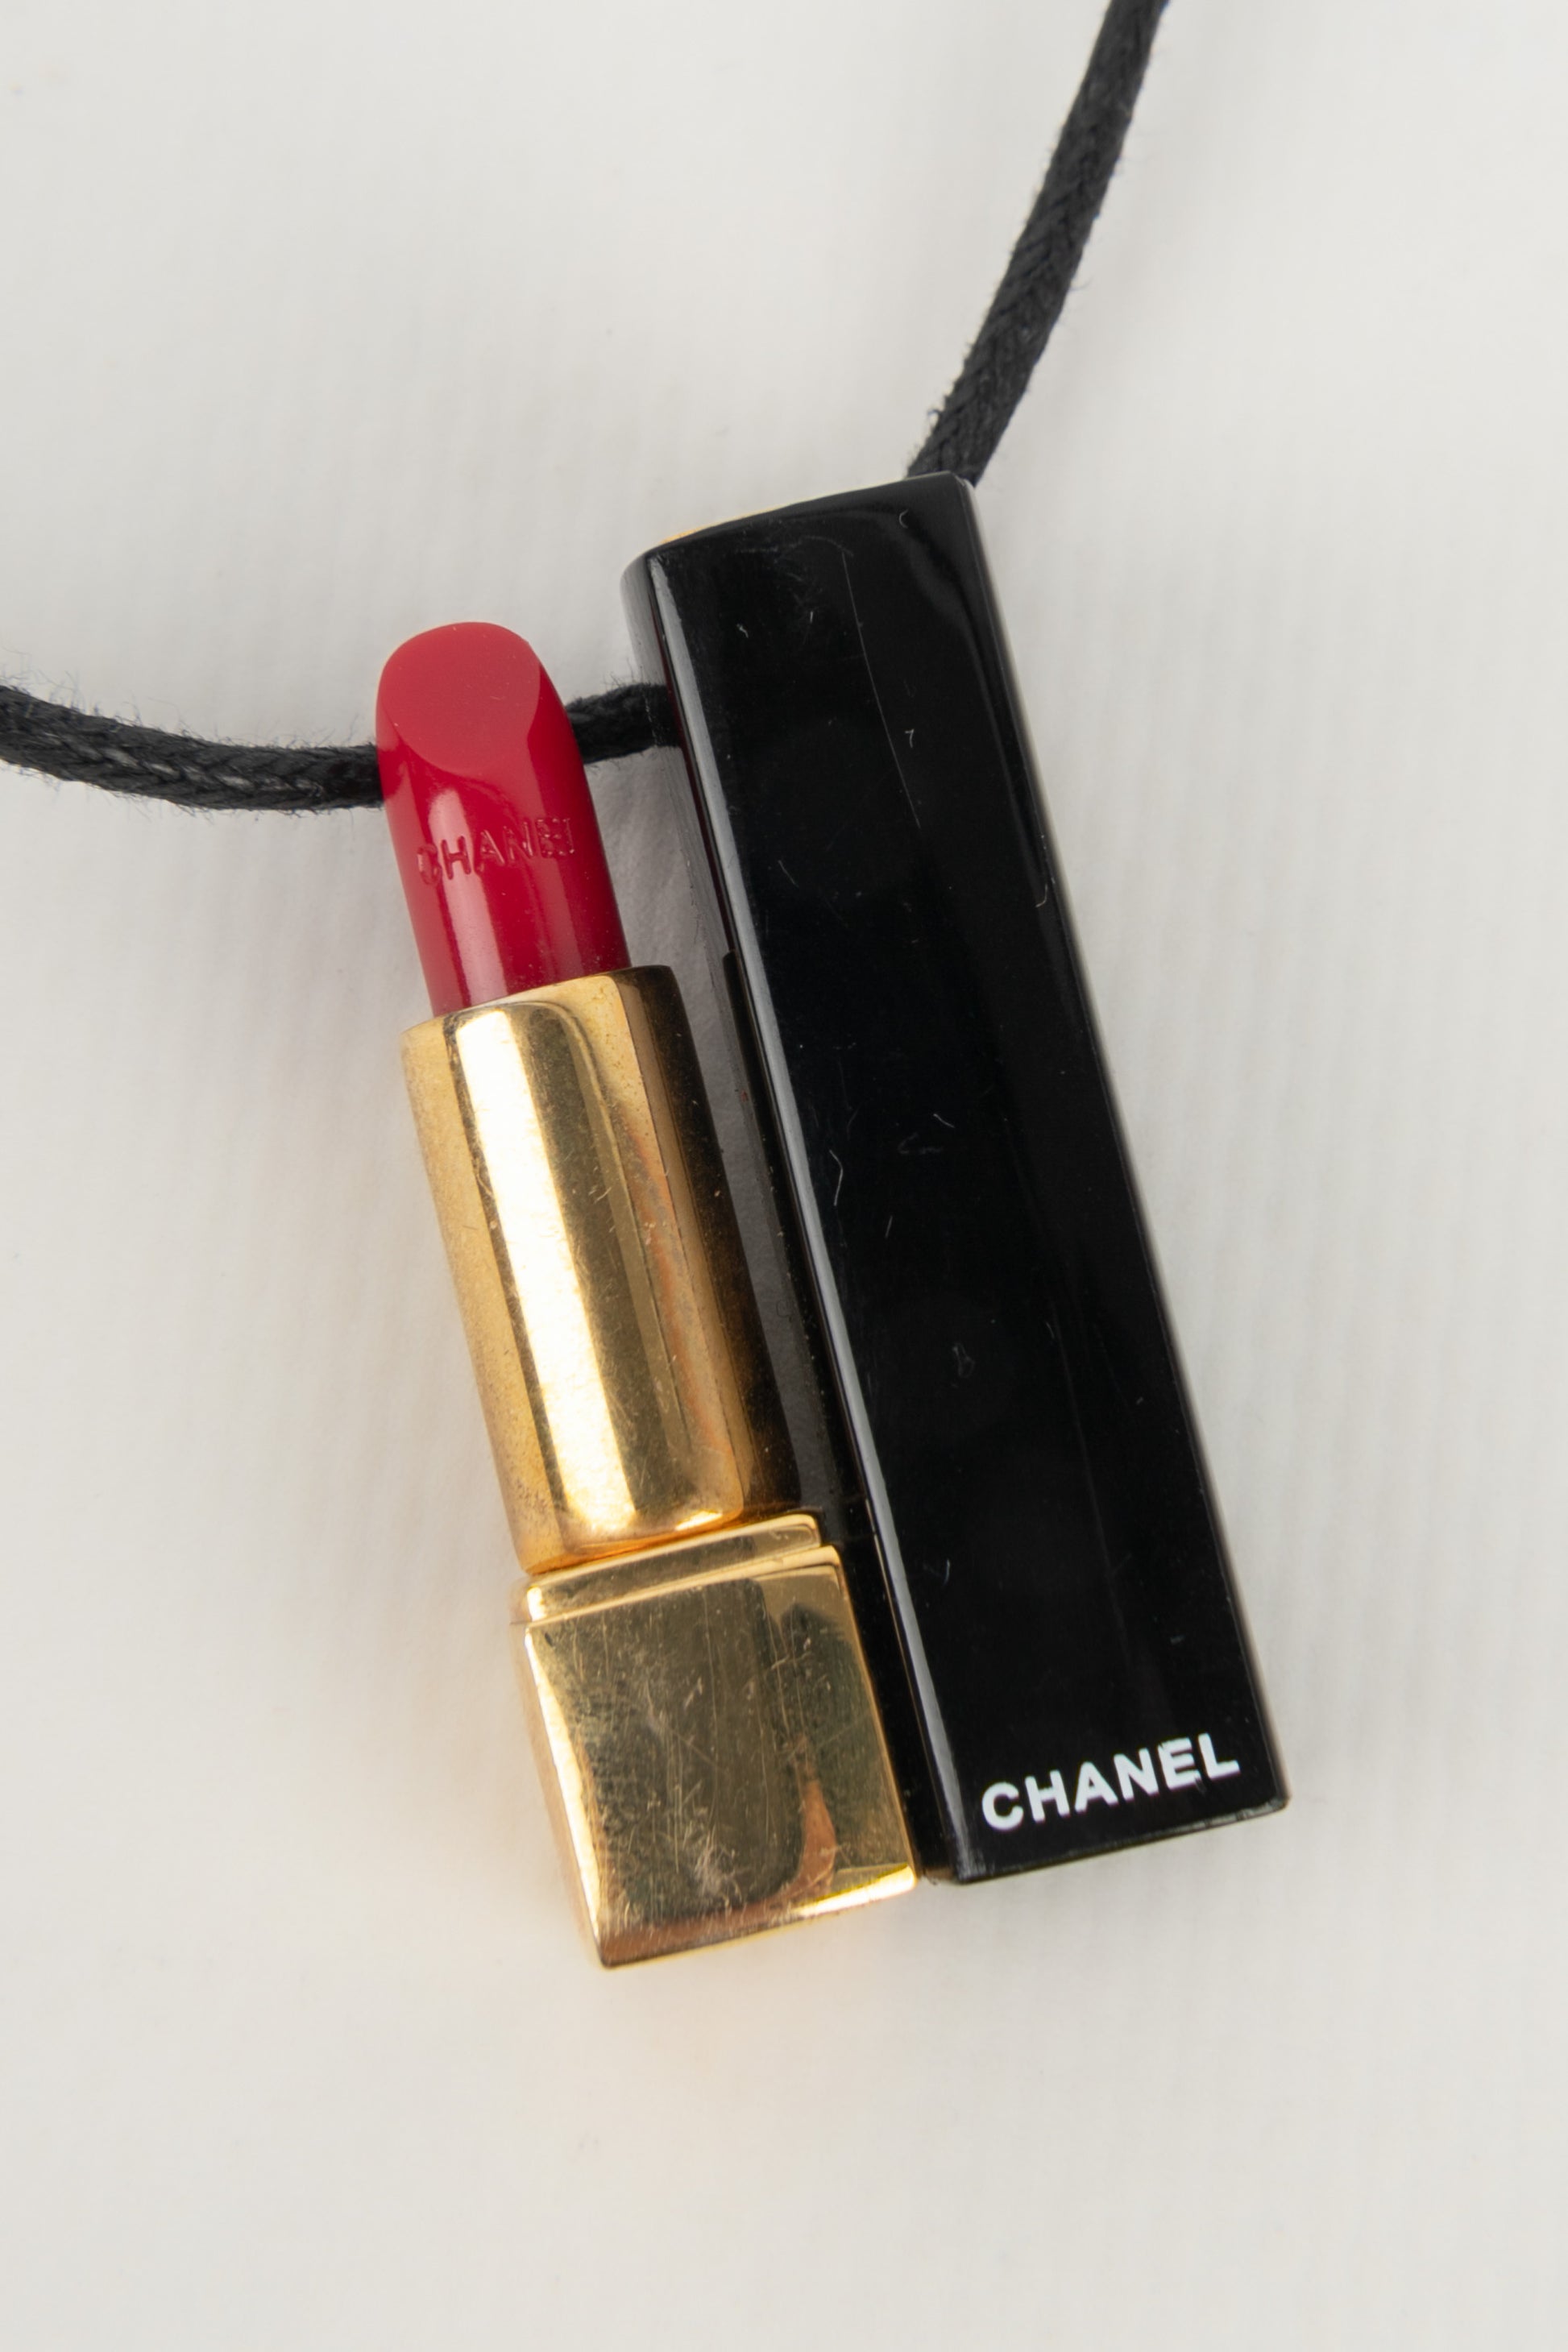 Collier "Make Up" Chanel